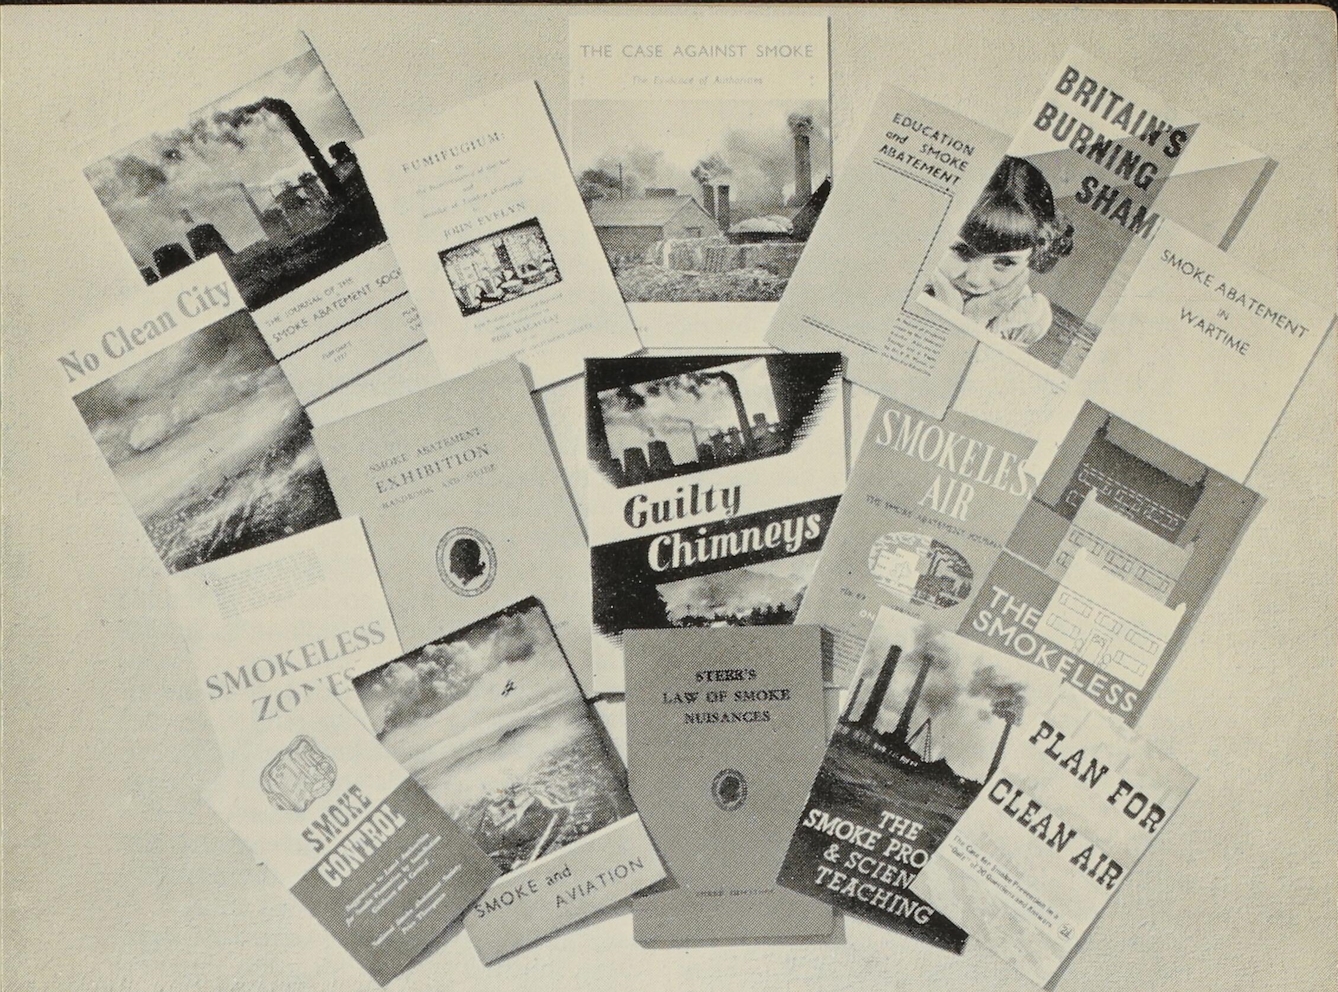 Black and white image of fanned-out pamphlets including "Guilty Chimneys", "No Clean City" and "Britain's Burning Shame".